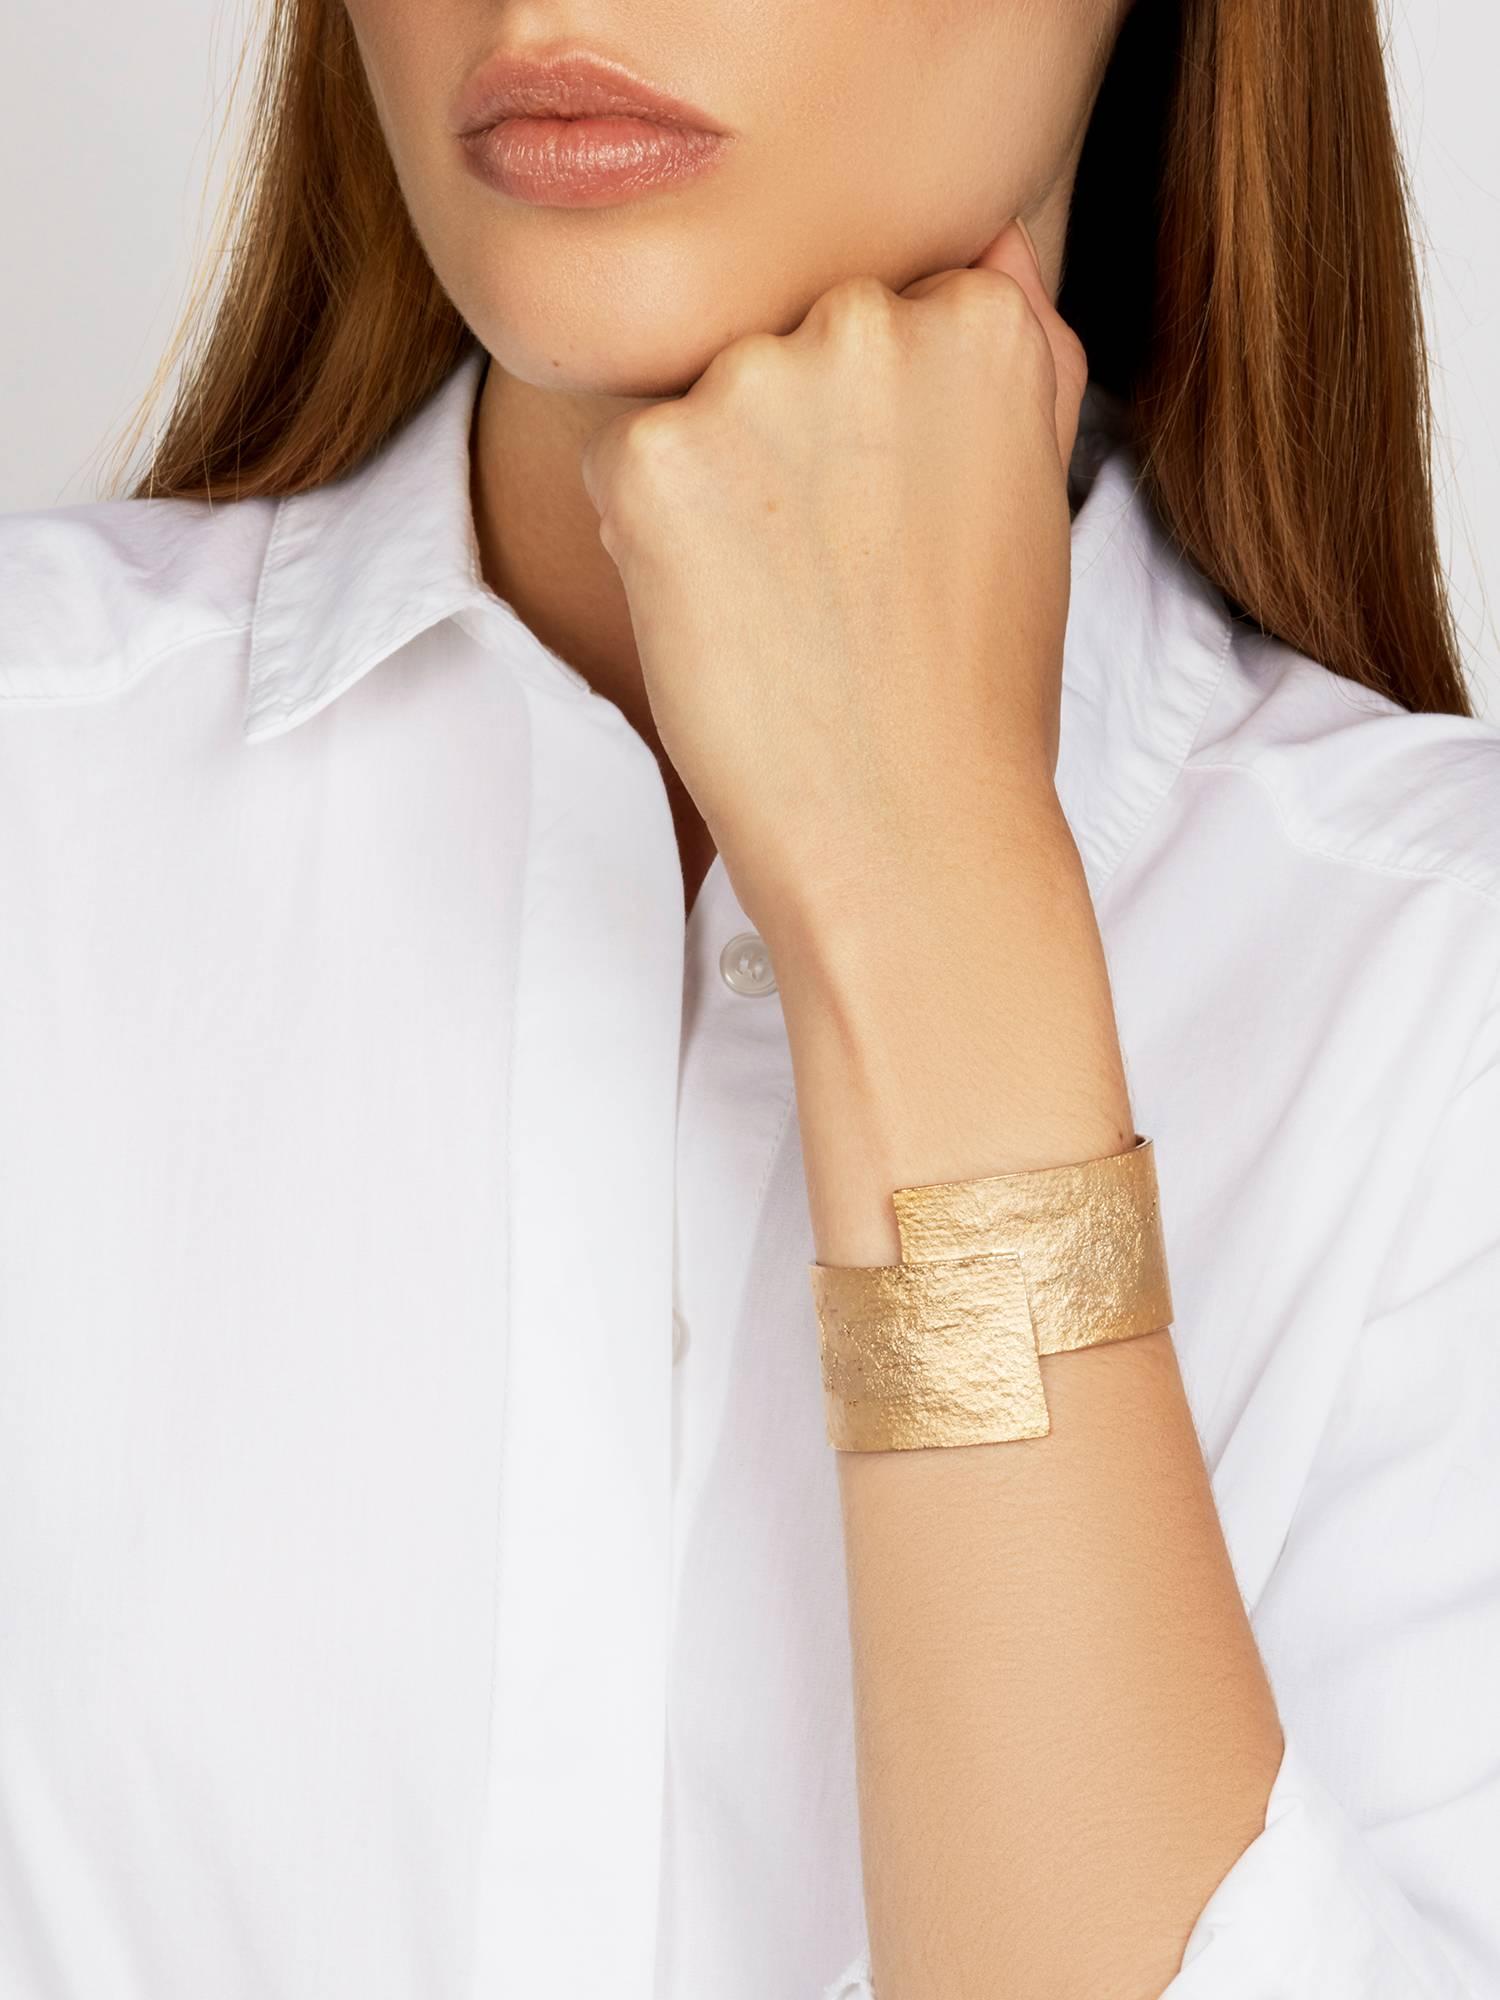 Crafted in solid, glowing bronze, the Abacus Cuff is a subtle statement piece for every day. The unique texture and split detail add interest to this classic wide cuff. 

Every piece in this collection is individually hand-crafted in paper and cast